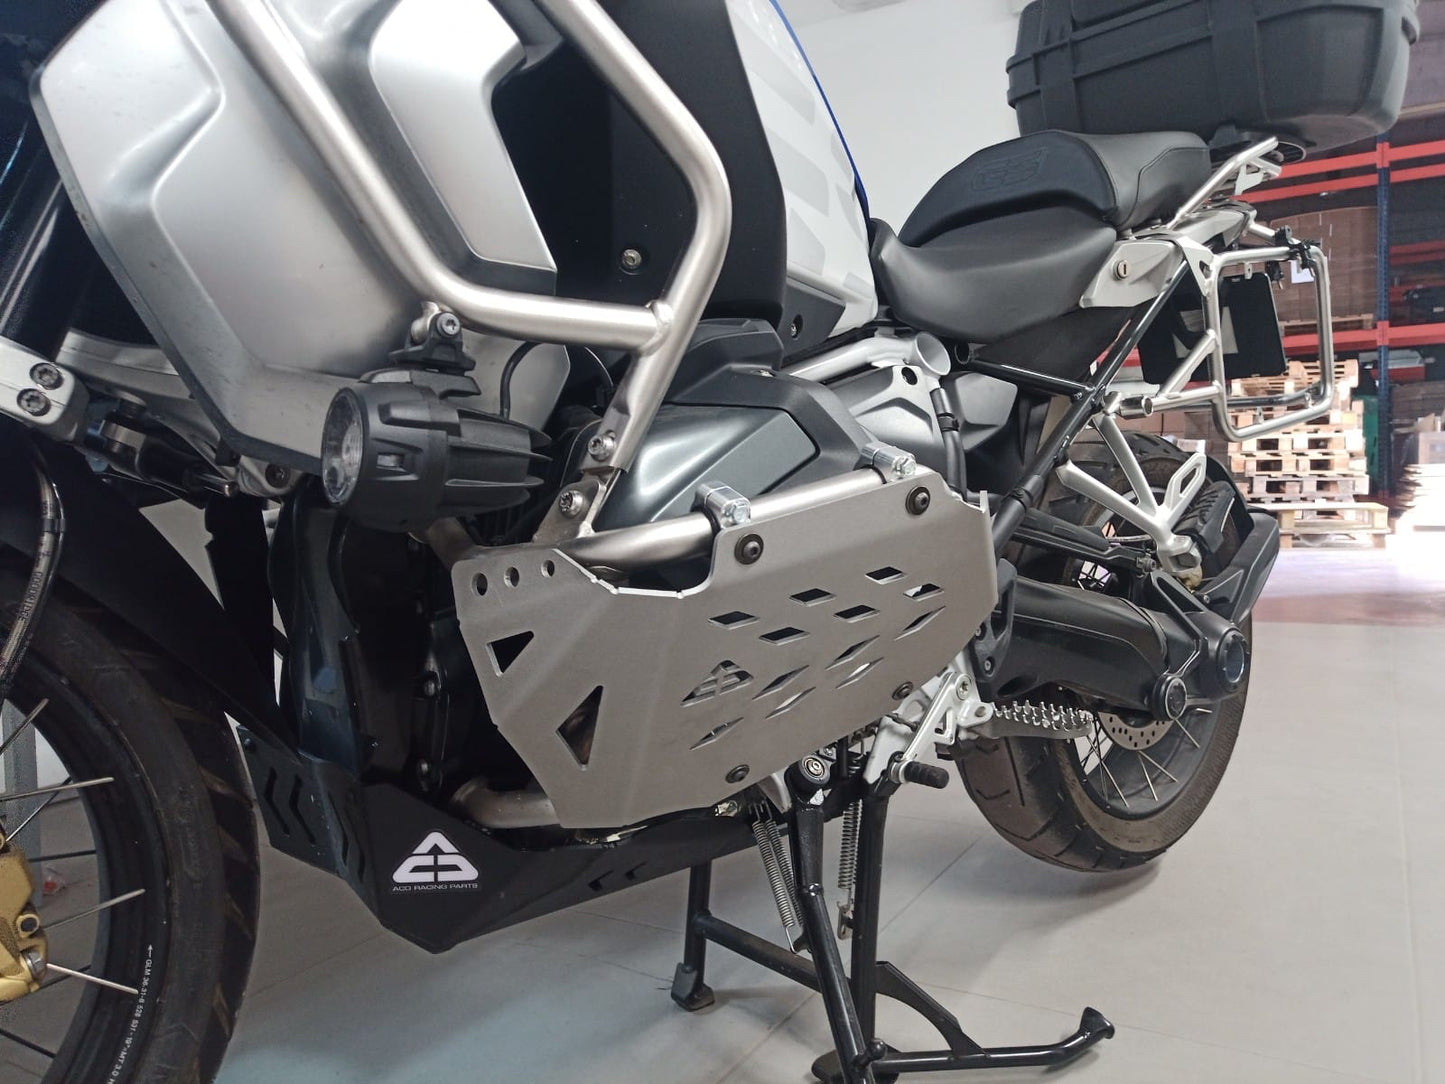 Set of engine sump protectors for the natural 1250 GS (compatible with original BMW crash bars)